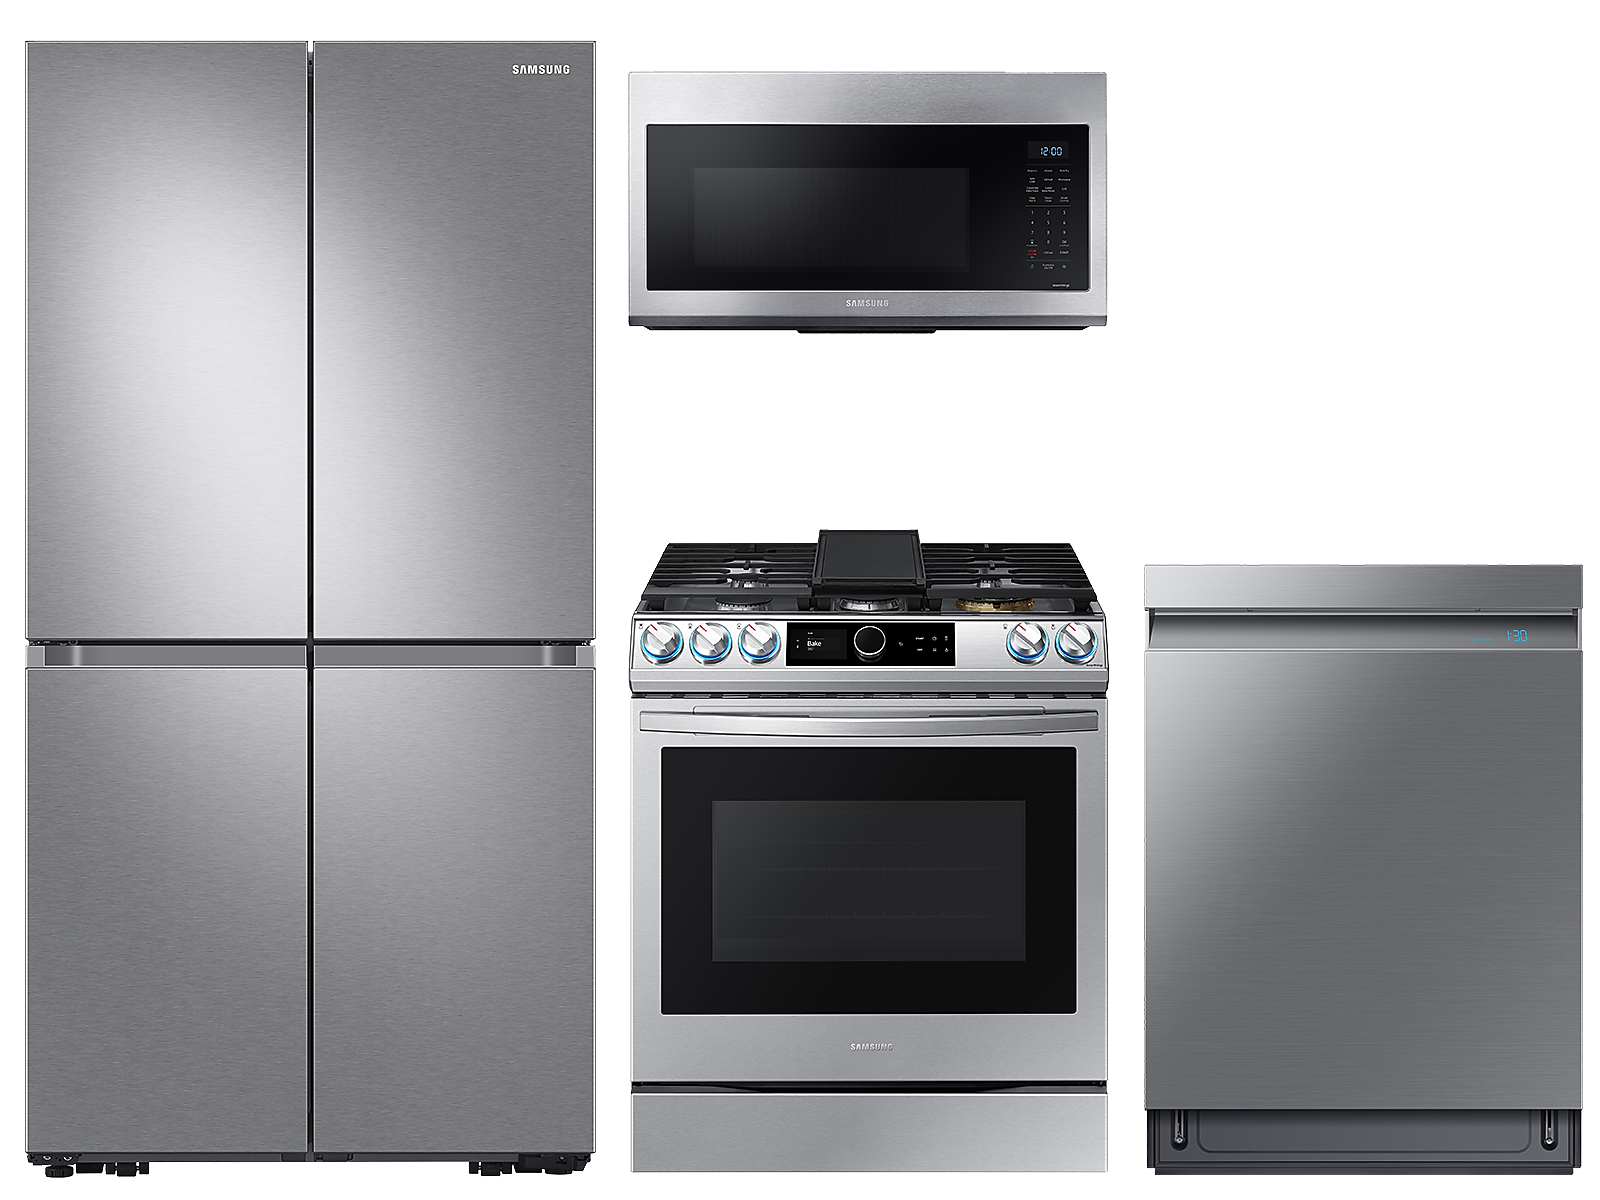 Samsung 23 cu. ft. counter depth 4-Door refrigerator, gas range, convection microwave and Smart Linear dishwasher package(BNDL-1646291344345) photo